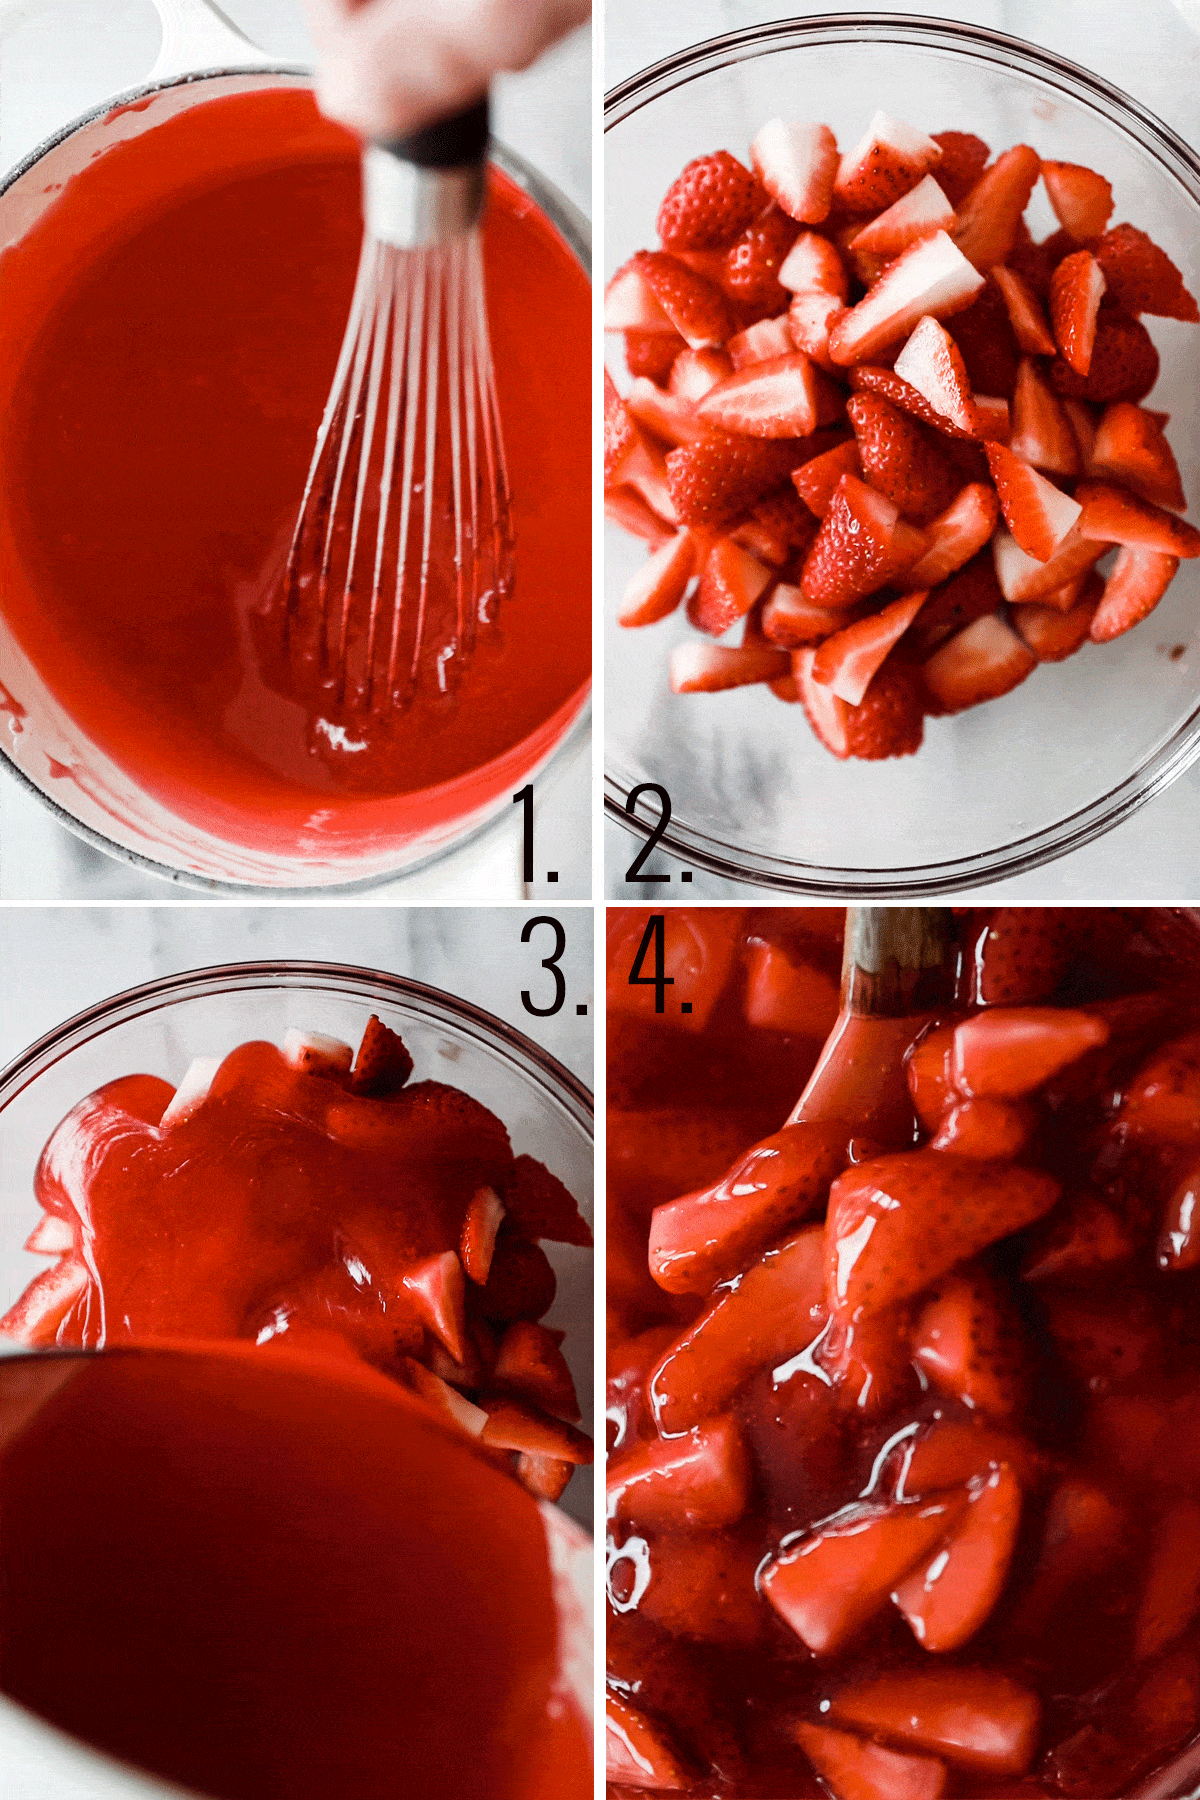 Sliced strawberries and jello mixture combined together in the glass bowl. 